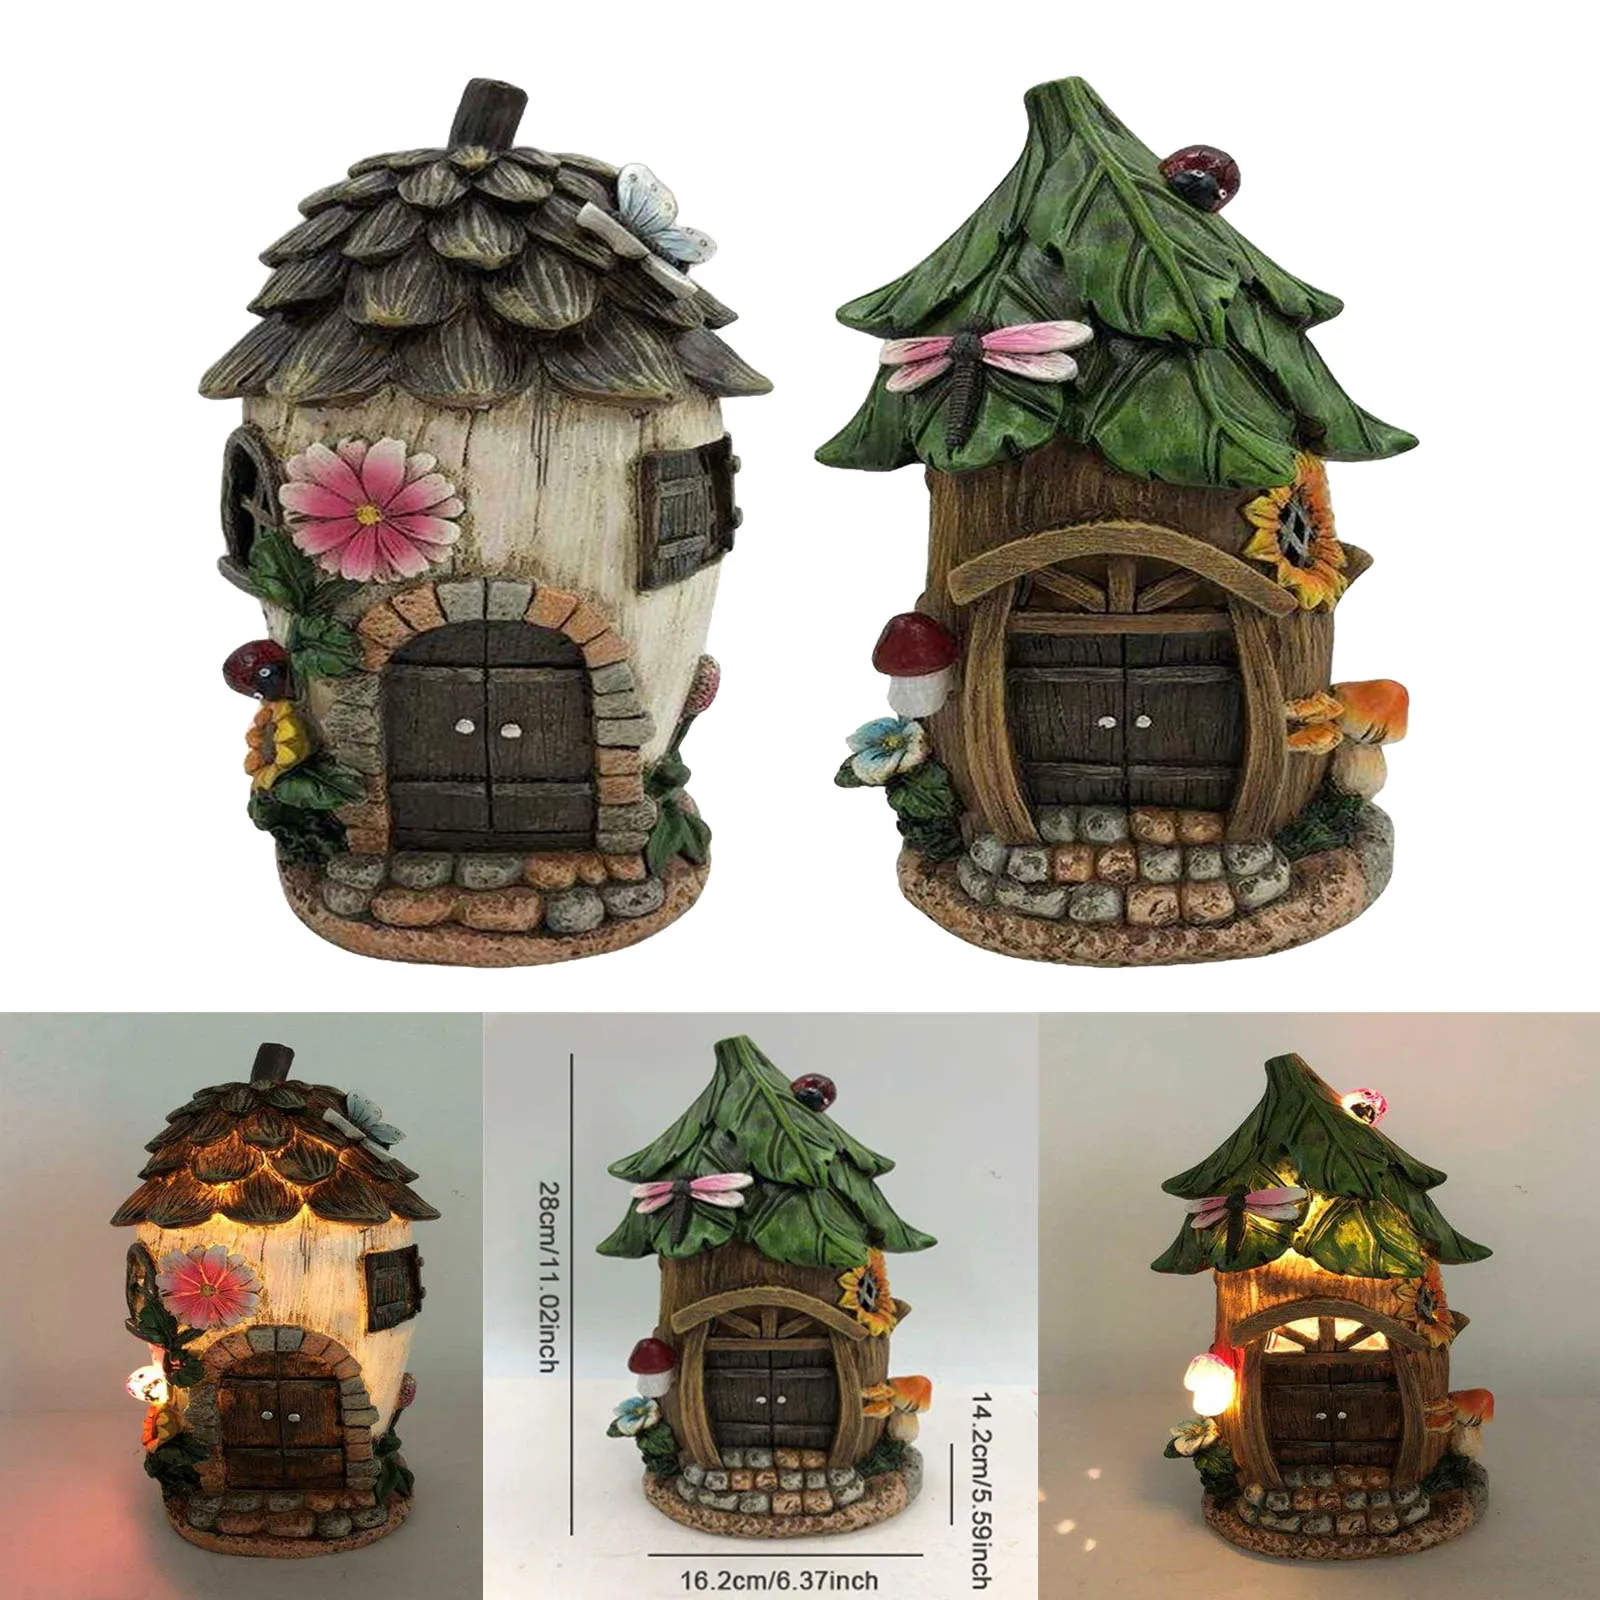 Garden Statues and Tiki Figurines for Patio Lawn Yard Decorations Yiosax Solar Lights Outdoor Garden D/écor Auto On//Off /& Long Working Hours 10.43 Tall）